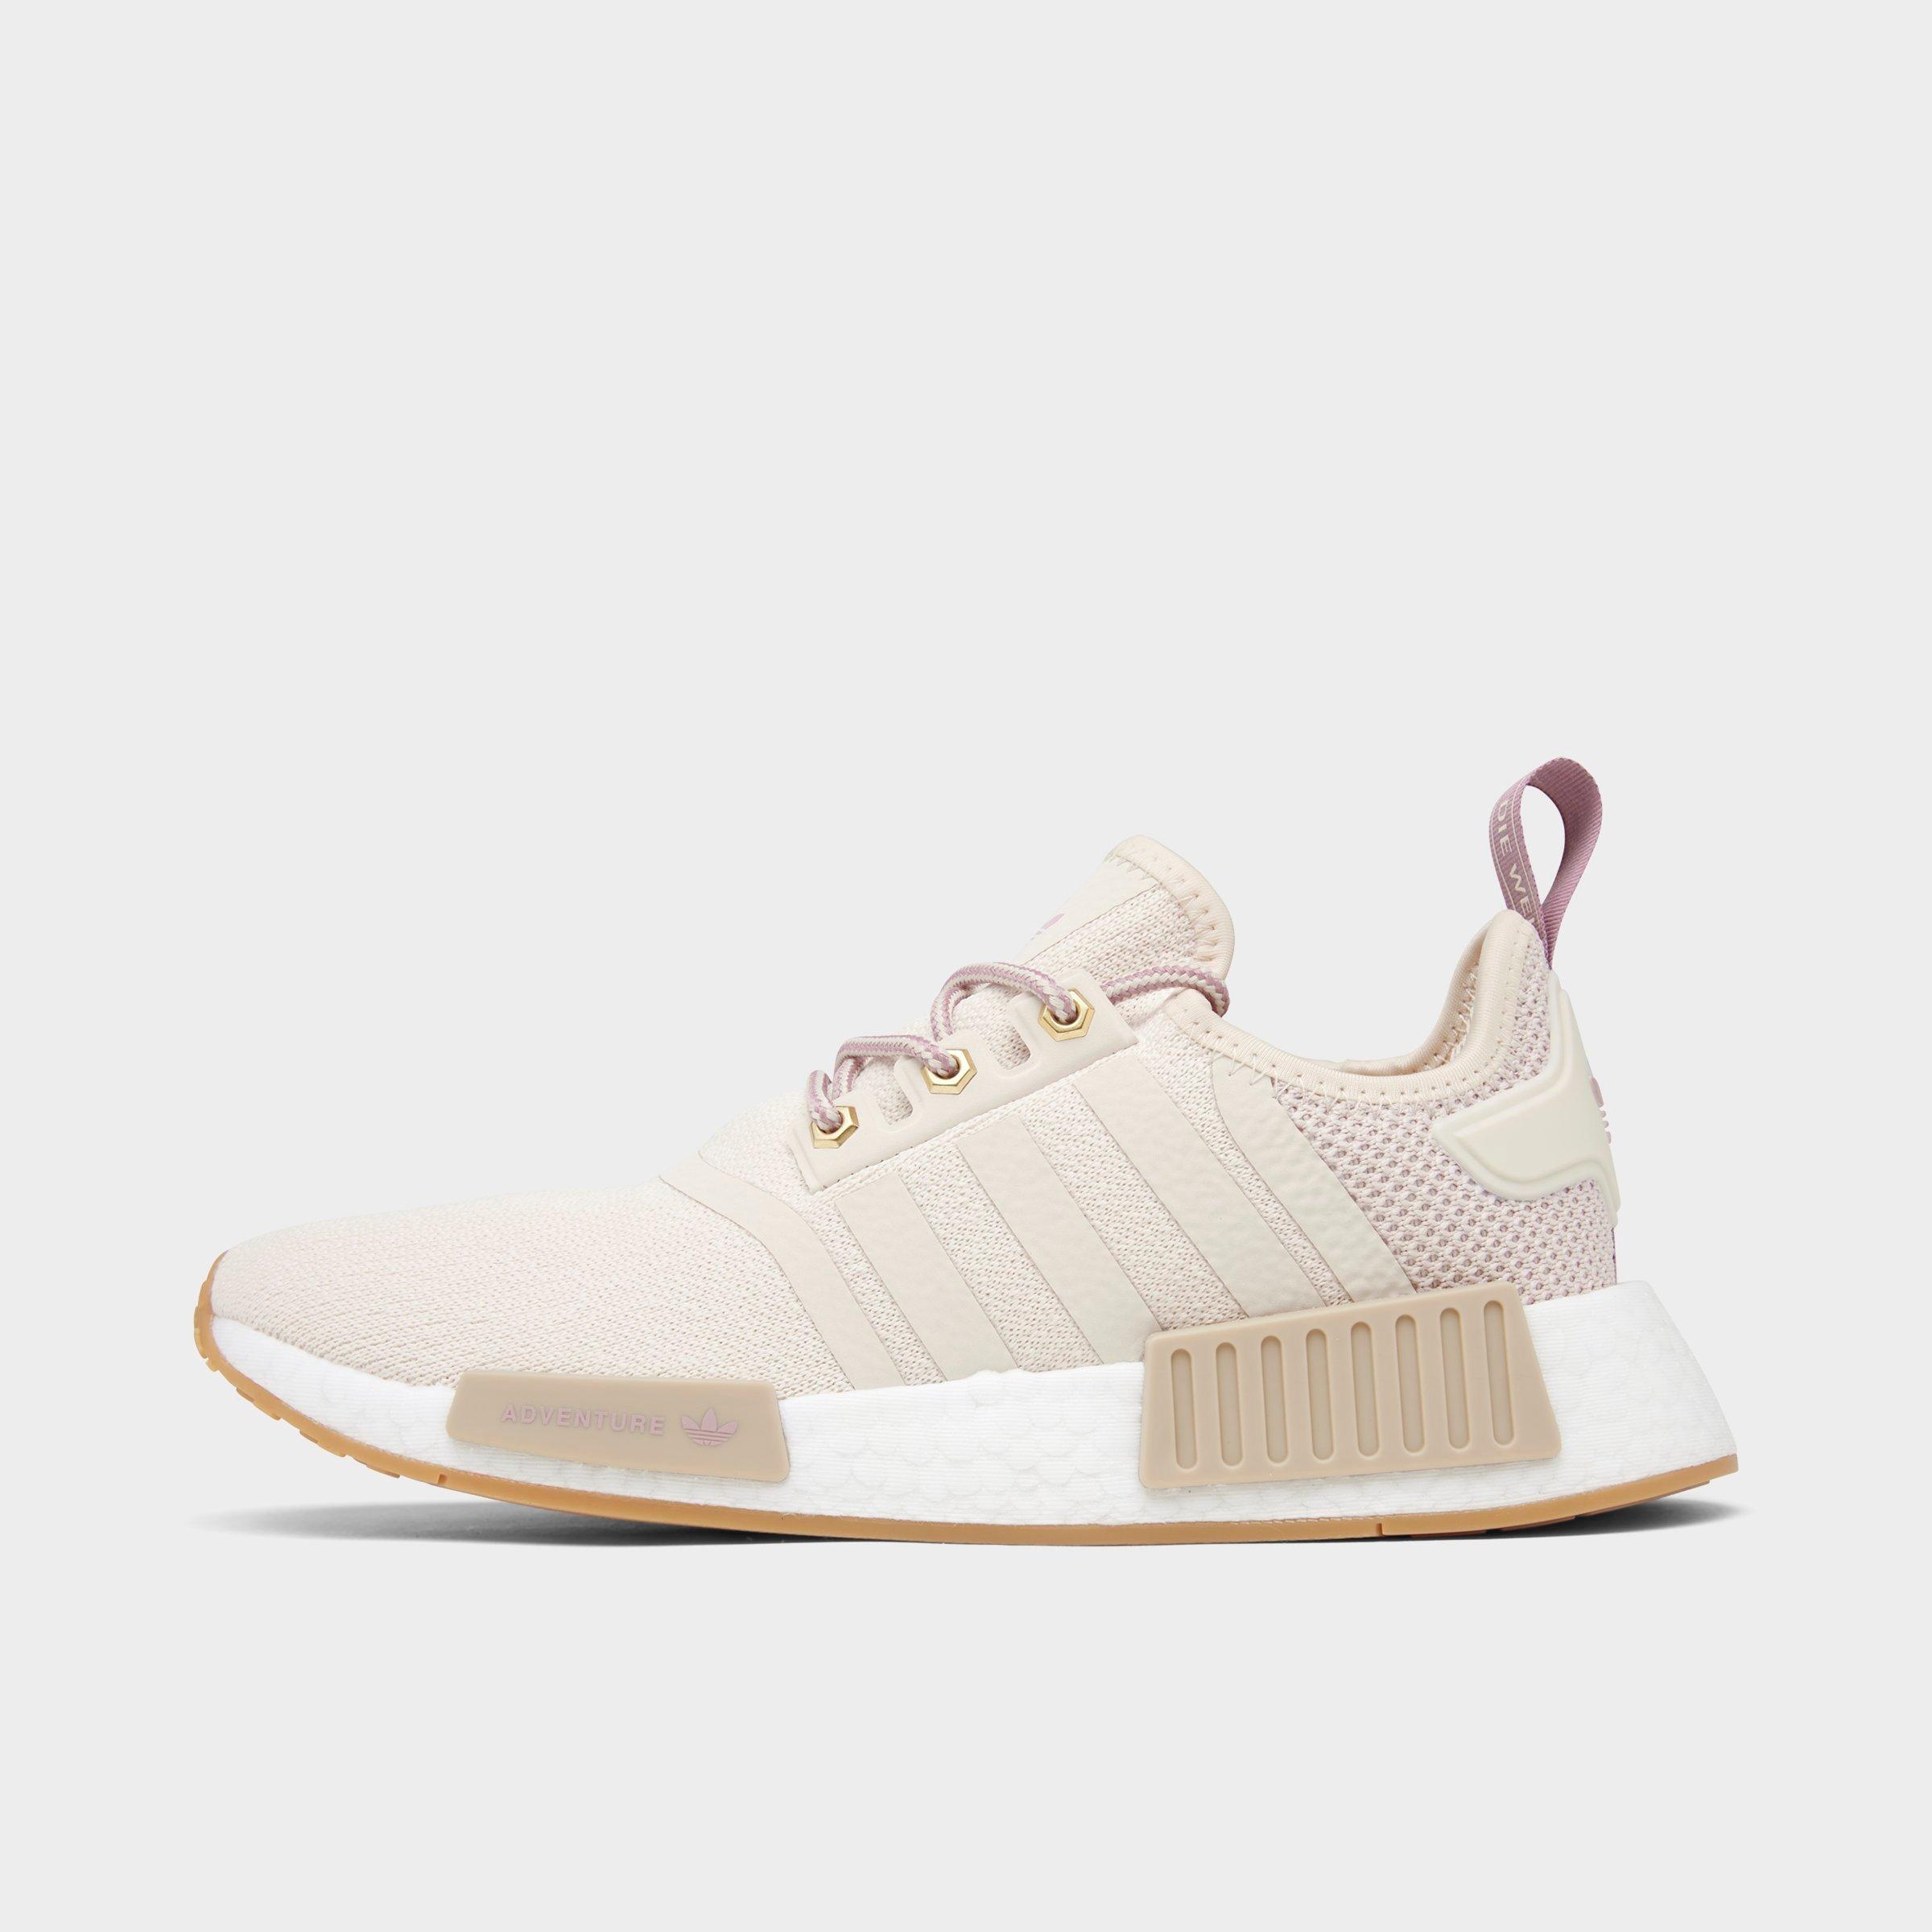 global access nmd r1 v2